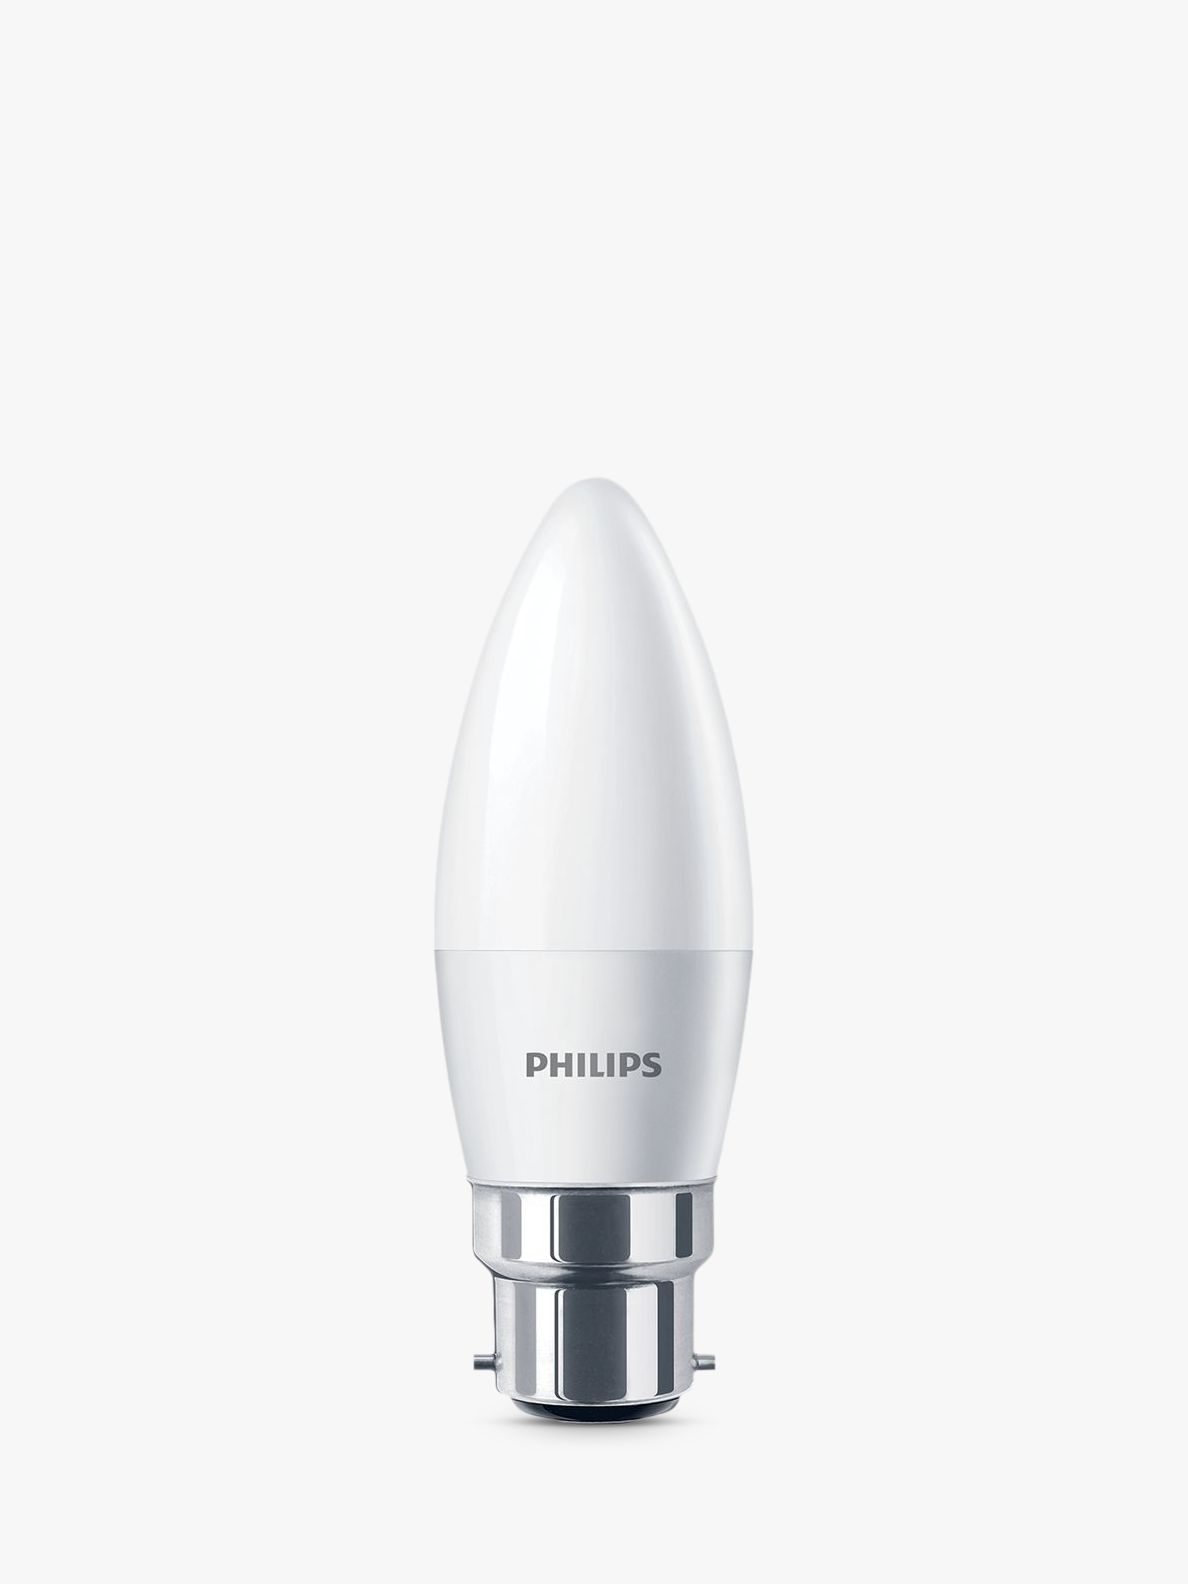 Philips 5W BC Candle Light Bulb, Frosted